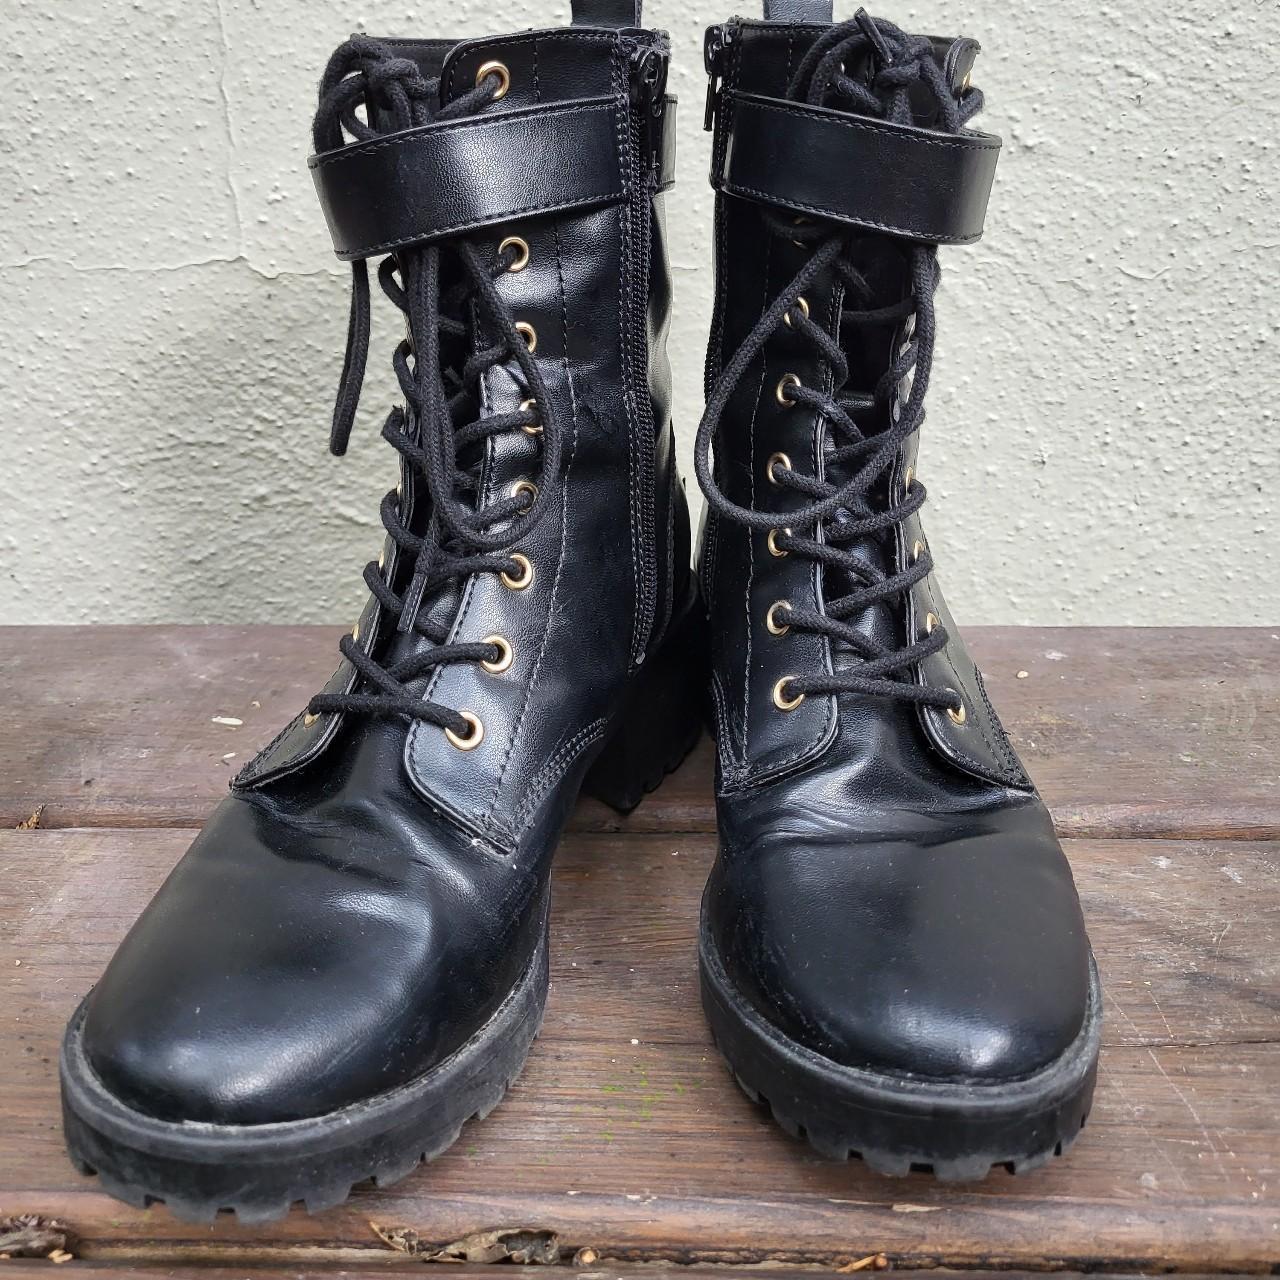 Juicy Couture combat boots size 8! Very comfy and - Depop